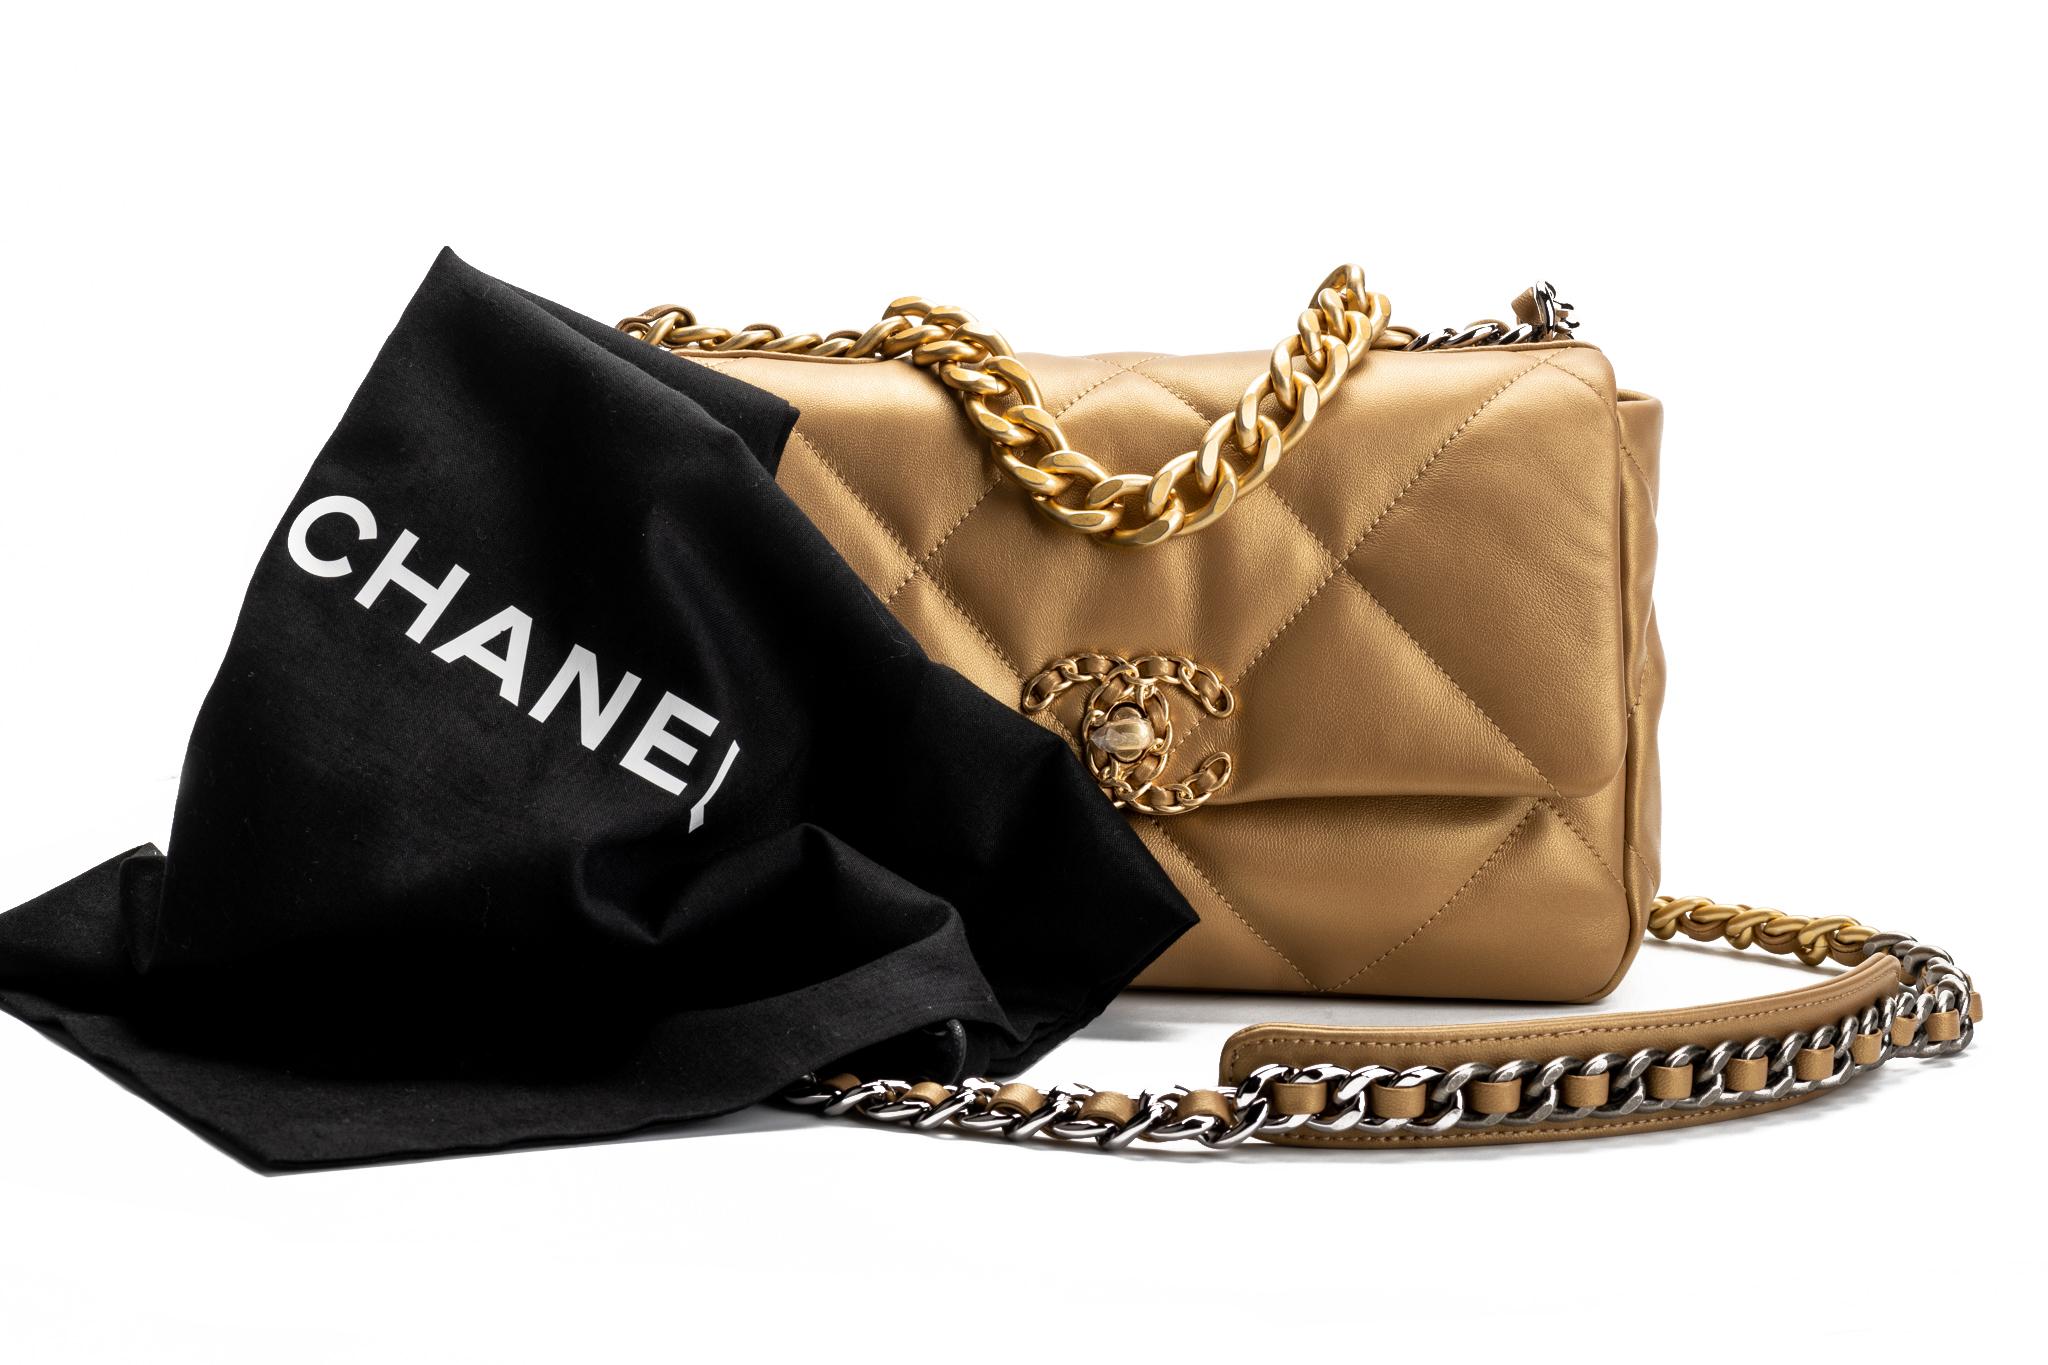 Chanel sold out worldwide 